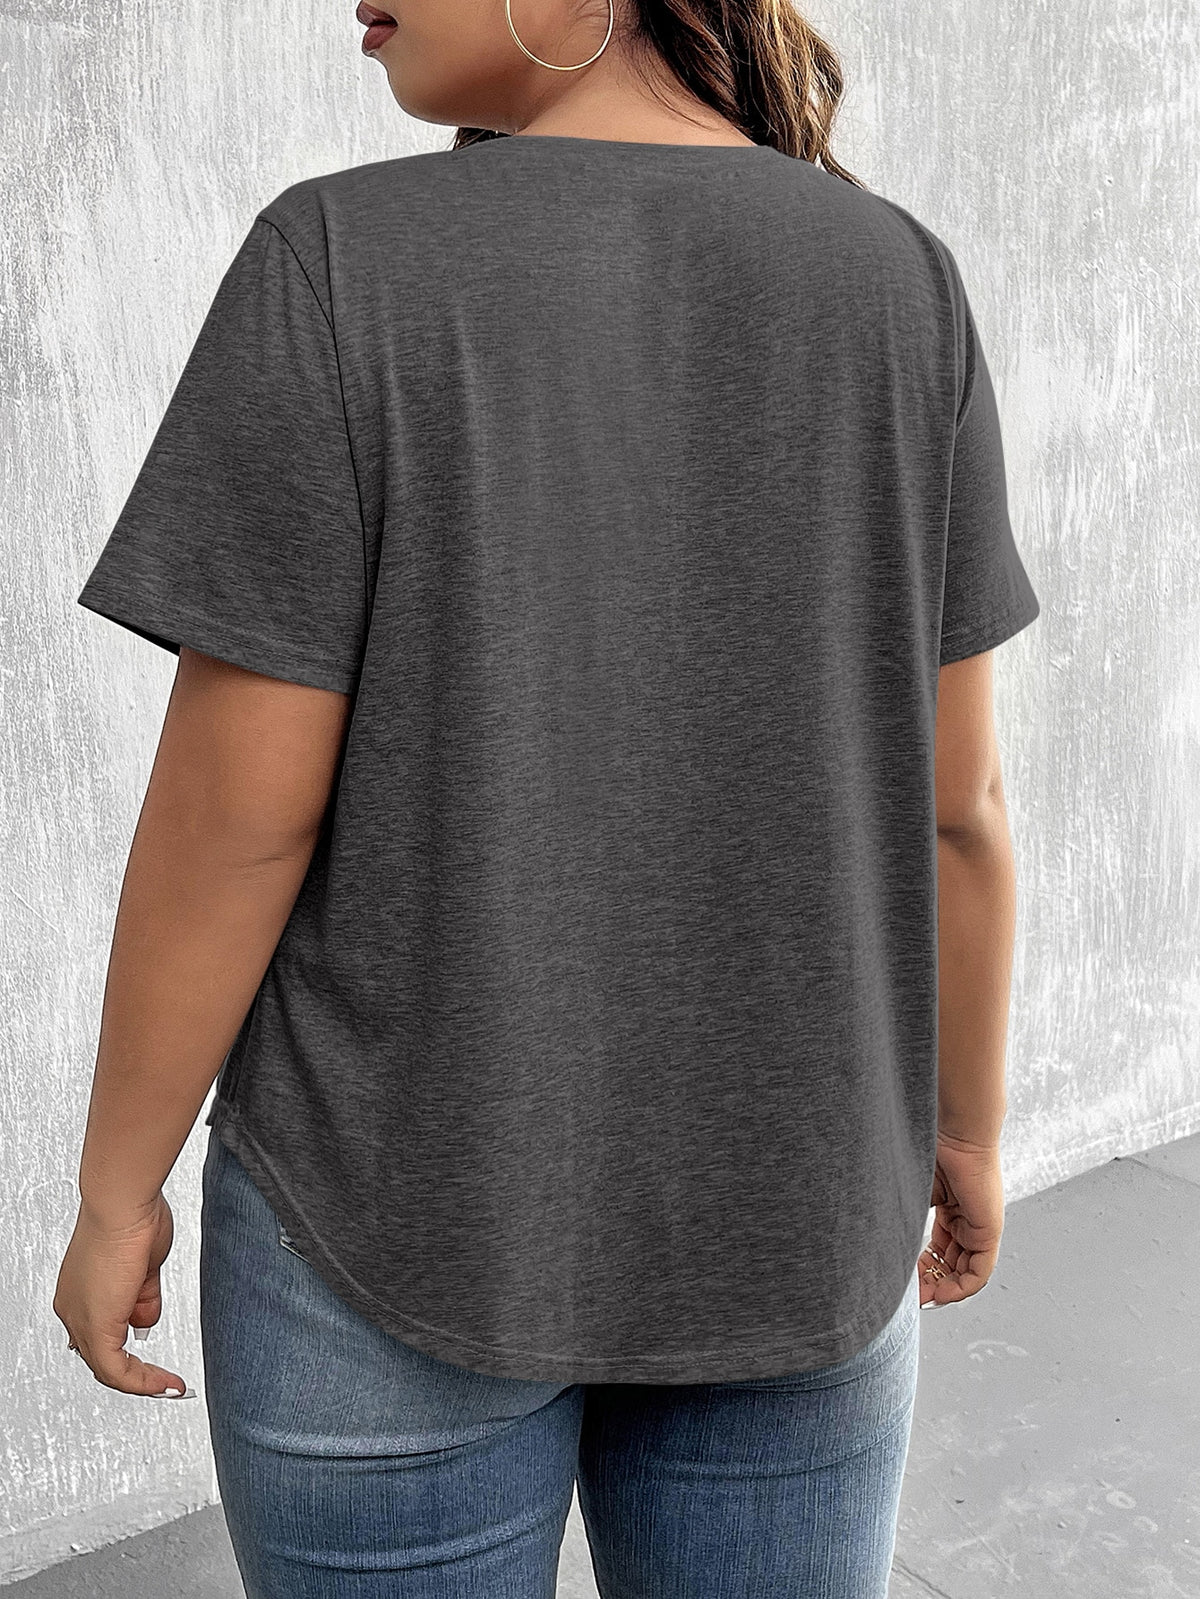 Plus V Neck Tee with Patched Pocket